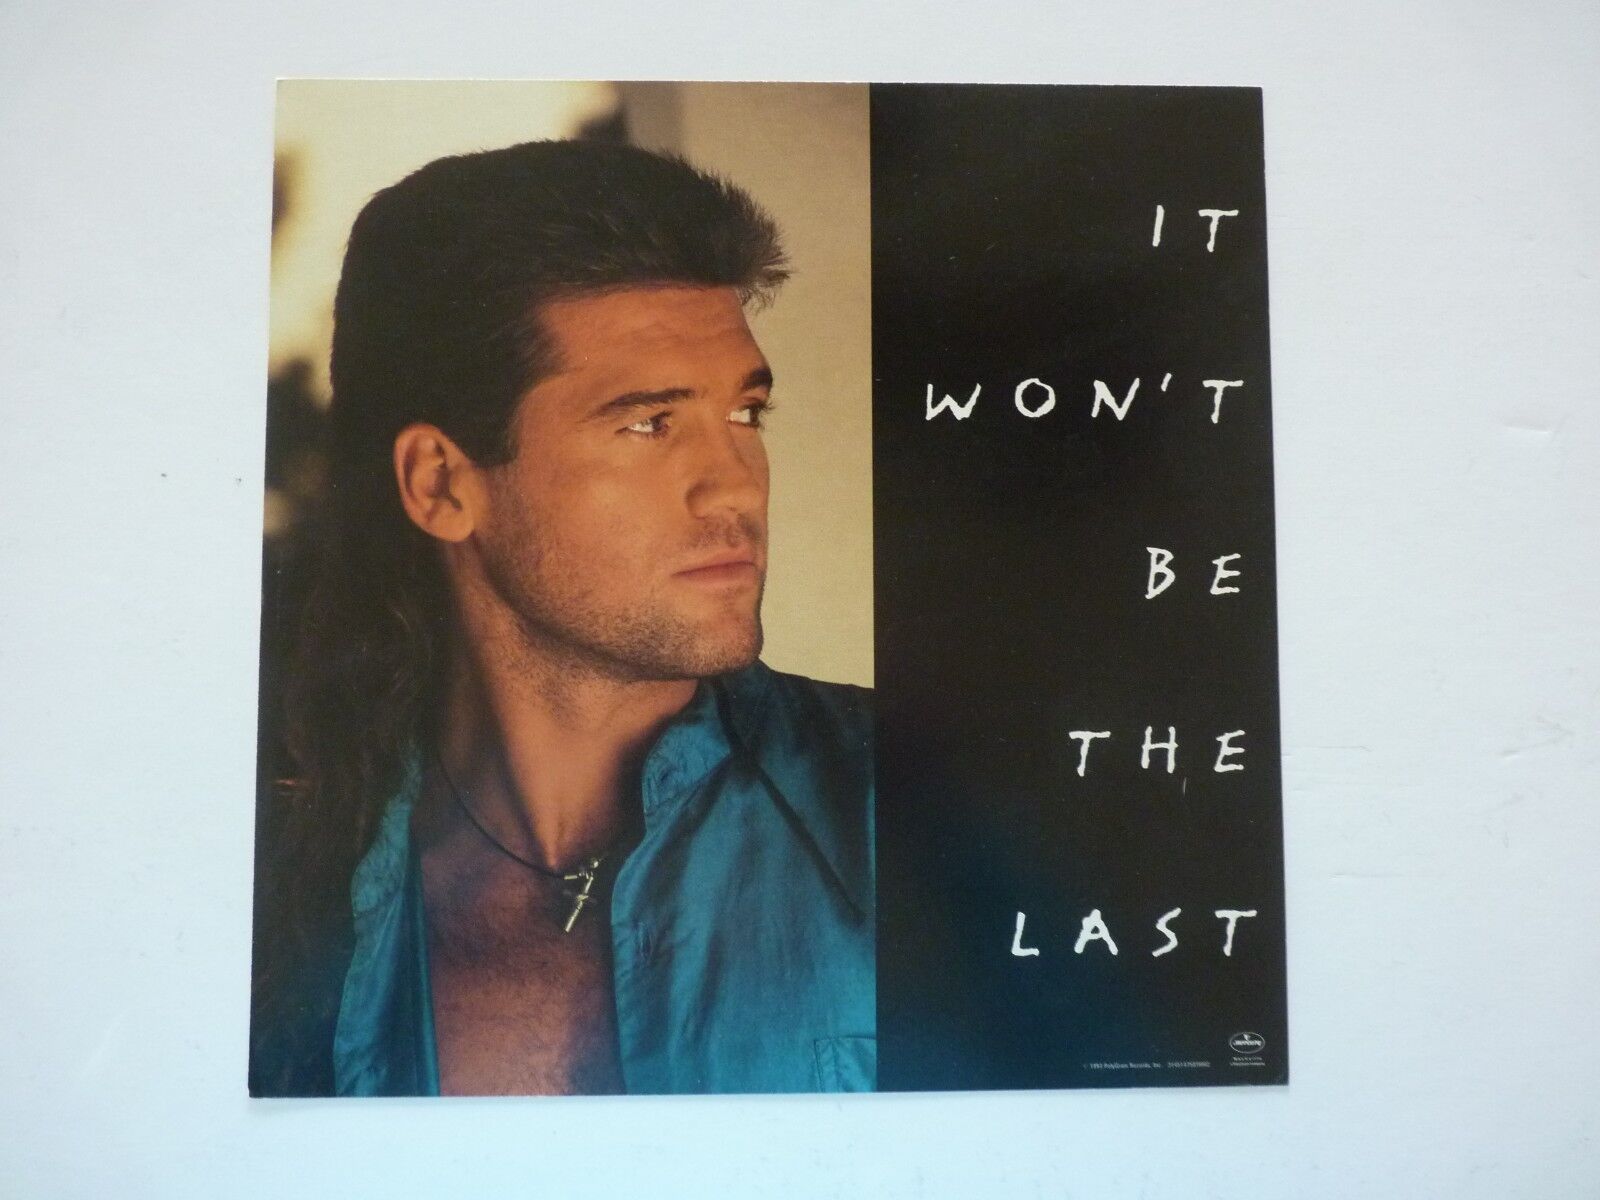 Billy Ray Cyrus Won't Be the Last 1993 LP Record Photo Poster painting Flat 12x12 Poster